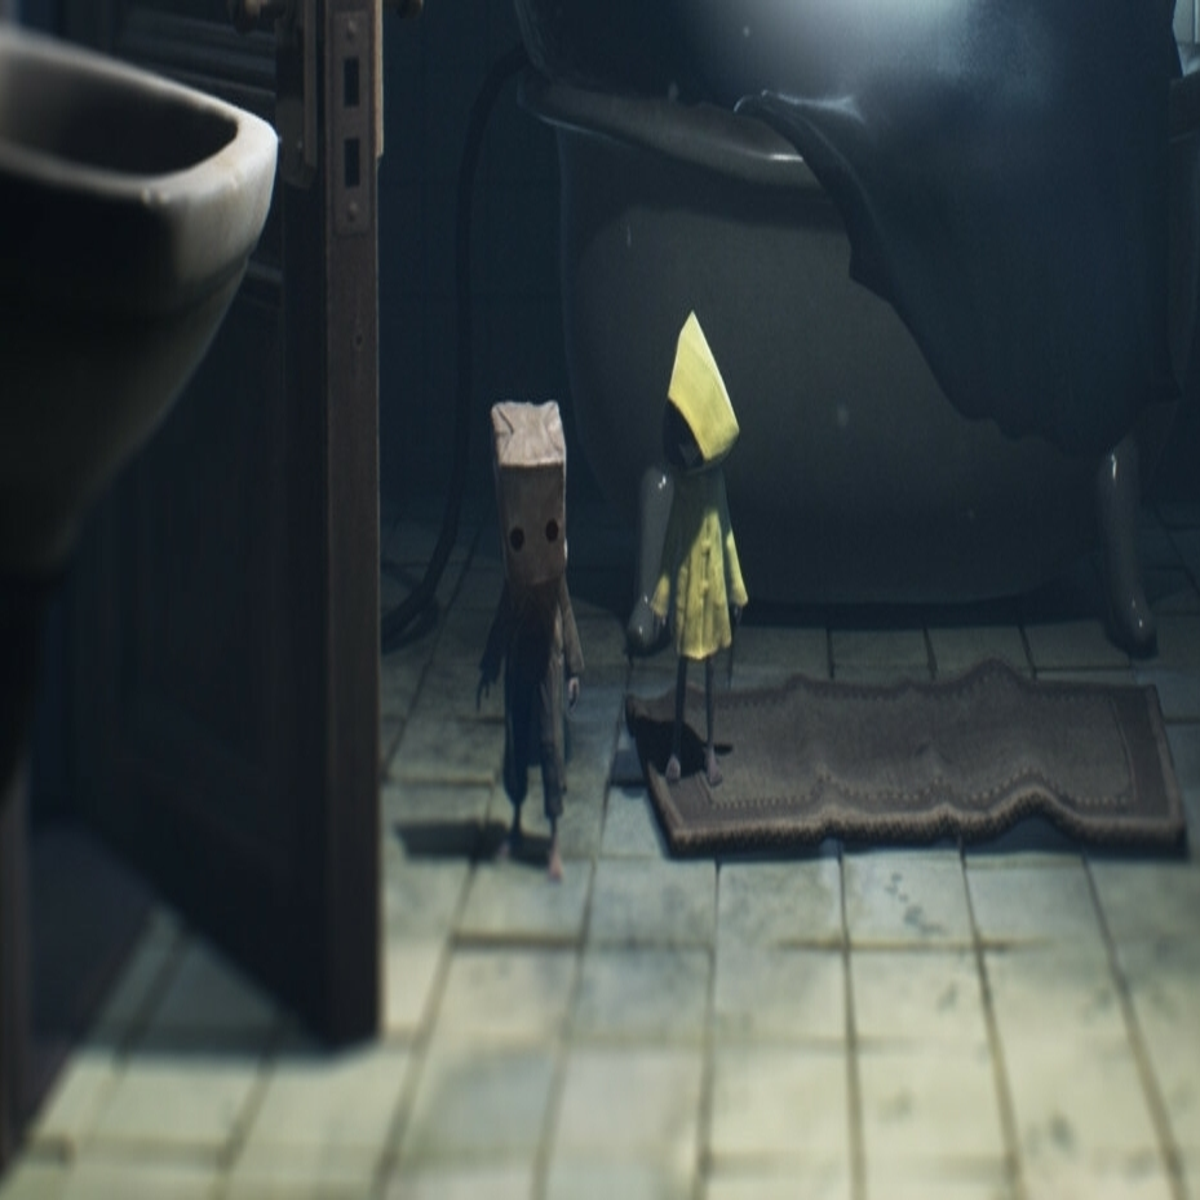 Mono: The Story You Never Knew (Little Nightmares 2) 